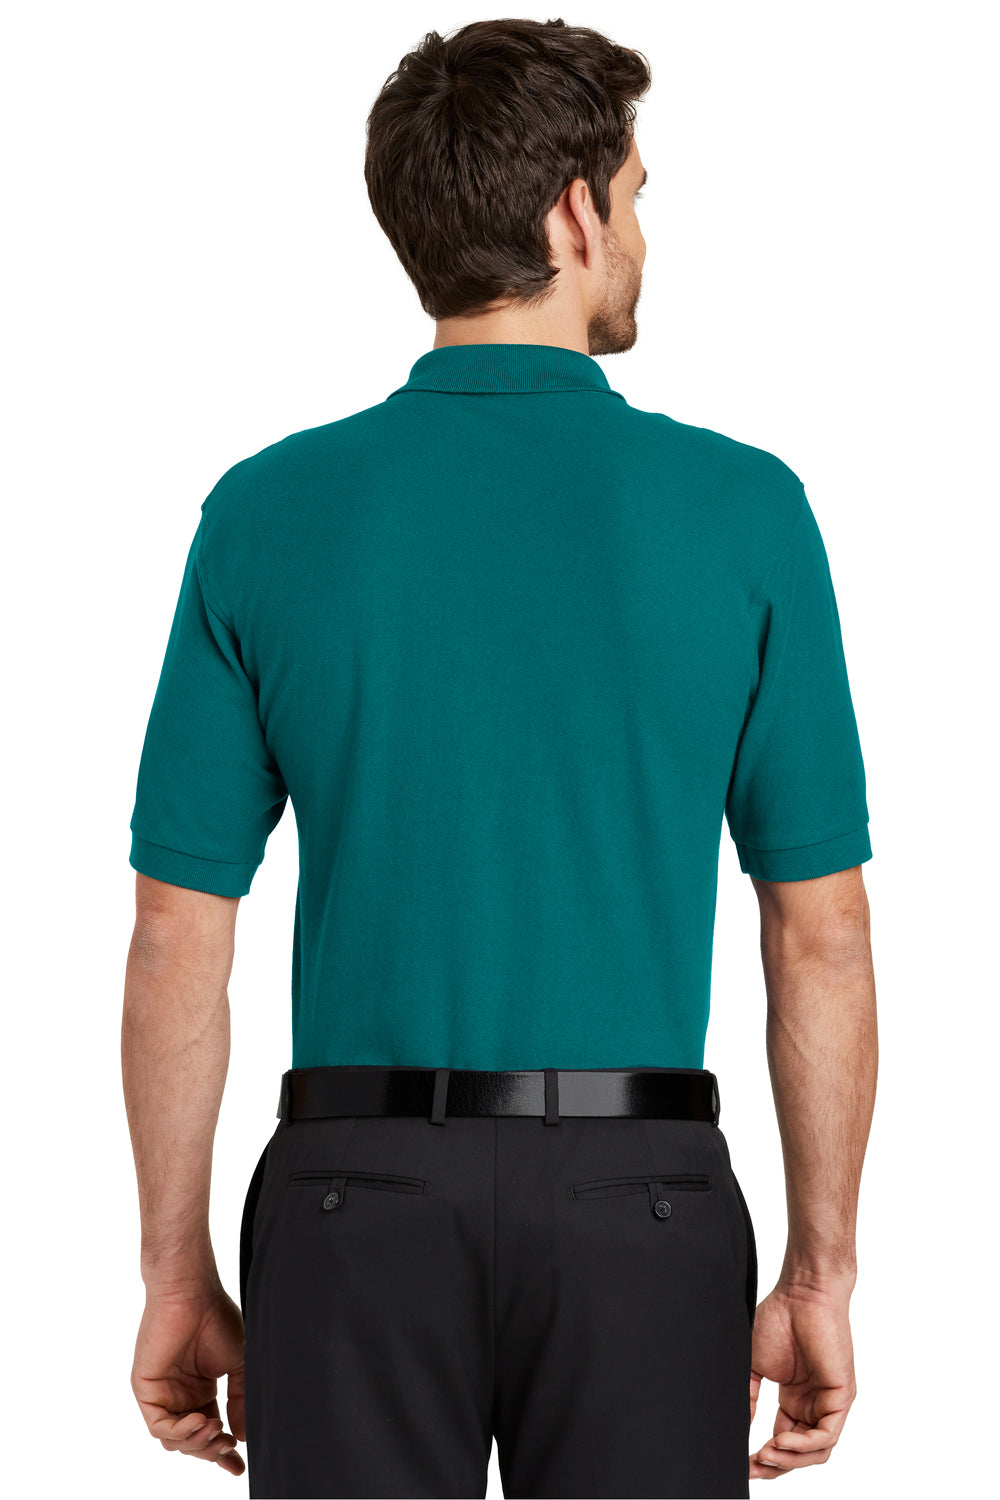 Port Authority K500 Mens Silk Touch Wrinkle Resistant Short Sleeve Polo Shirt Teal Green Back